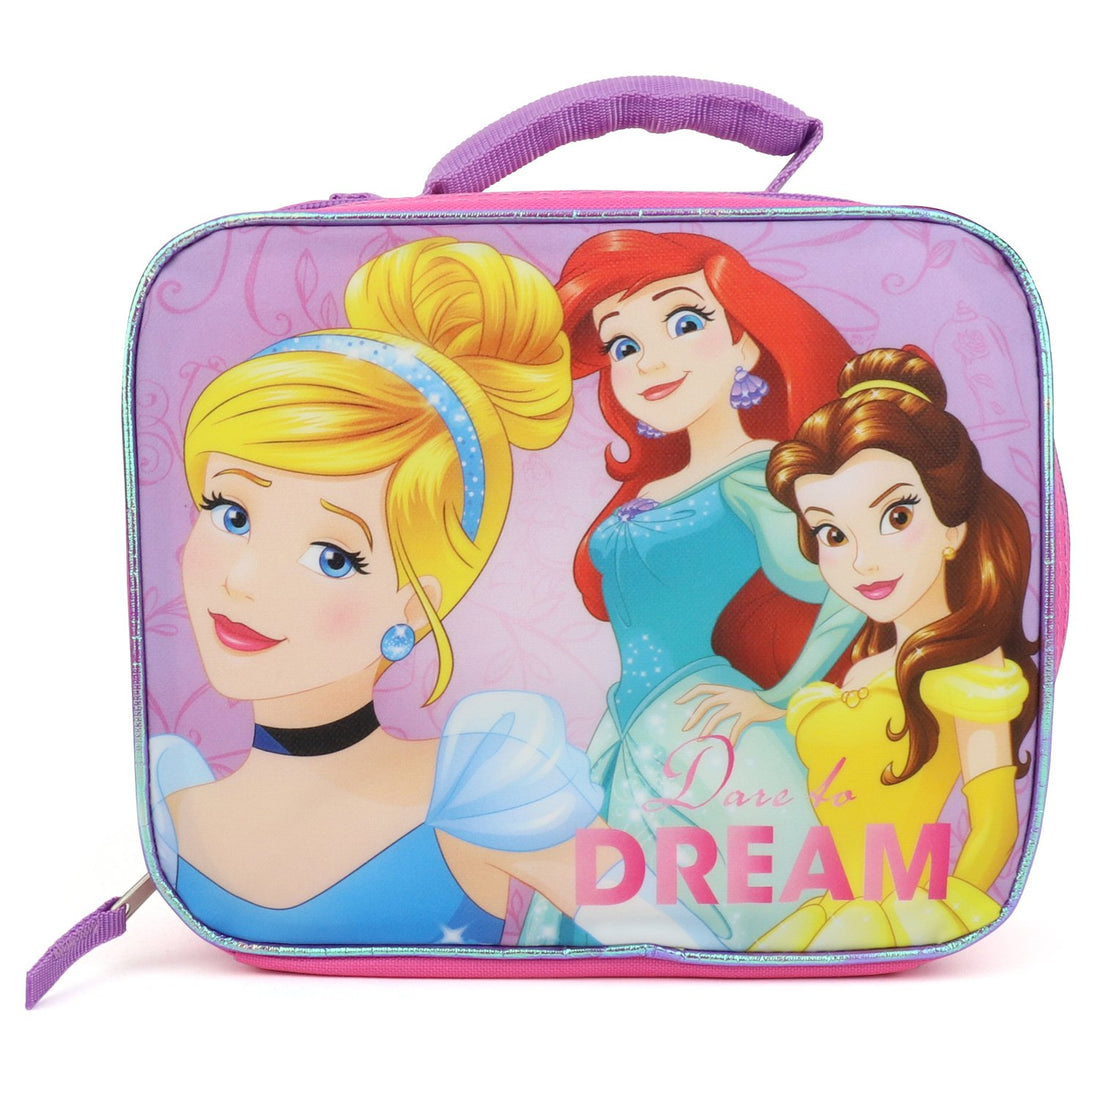 Trendy Apparel Shop Girl's Princess Rectangle Insulated Lunch Box Bag with Strap